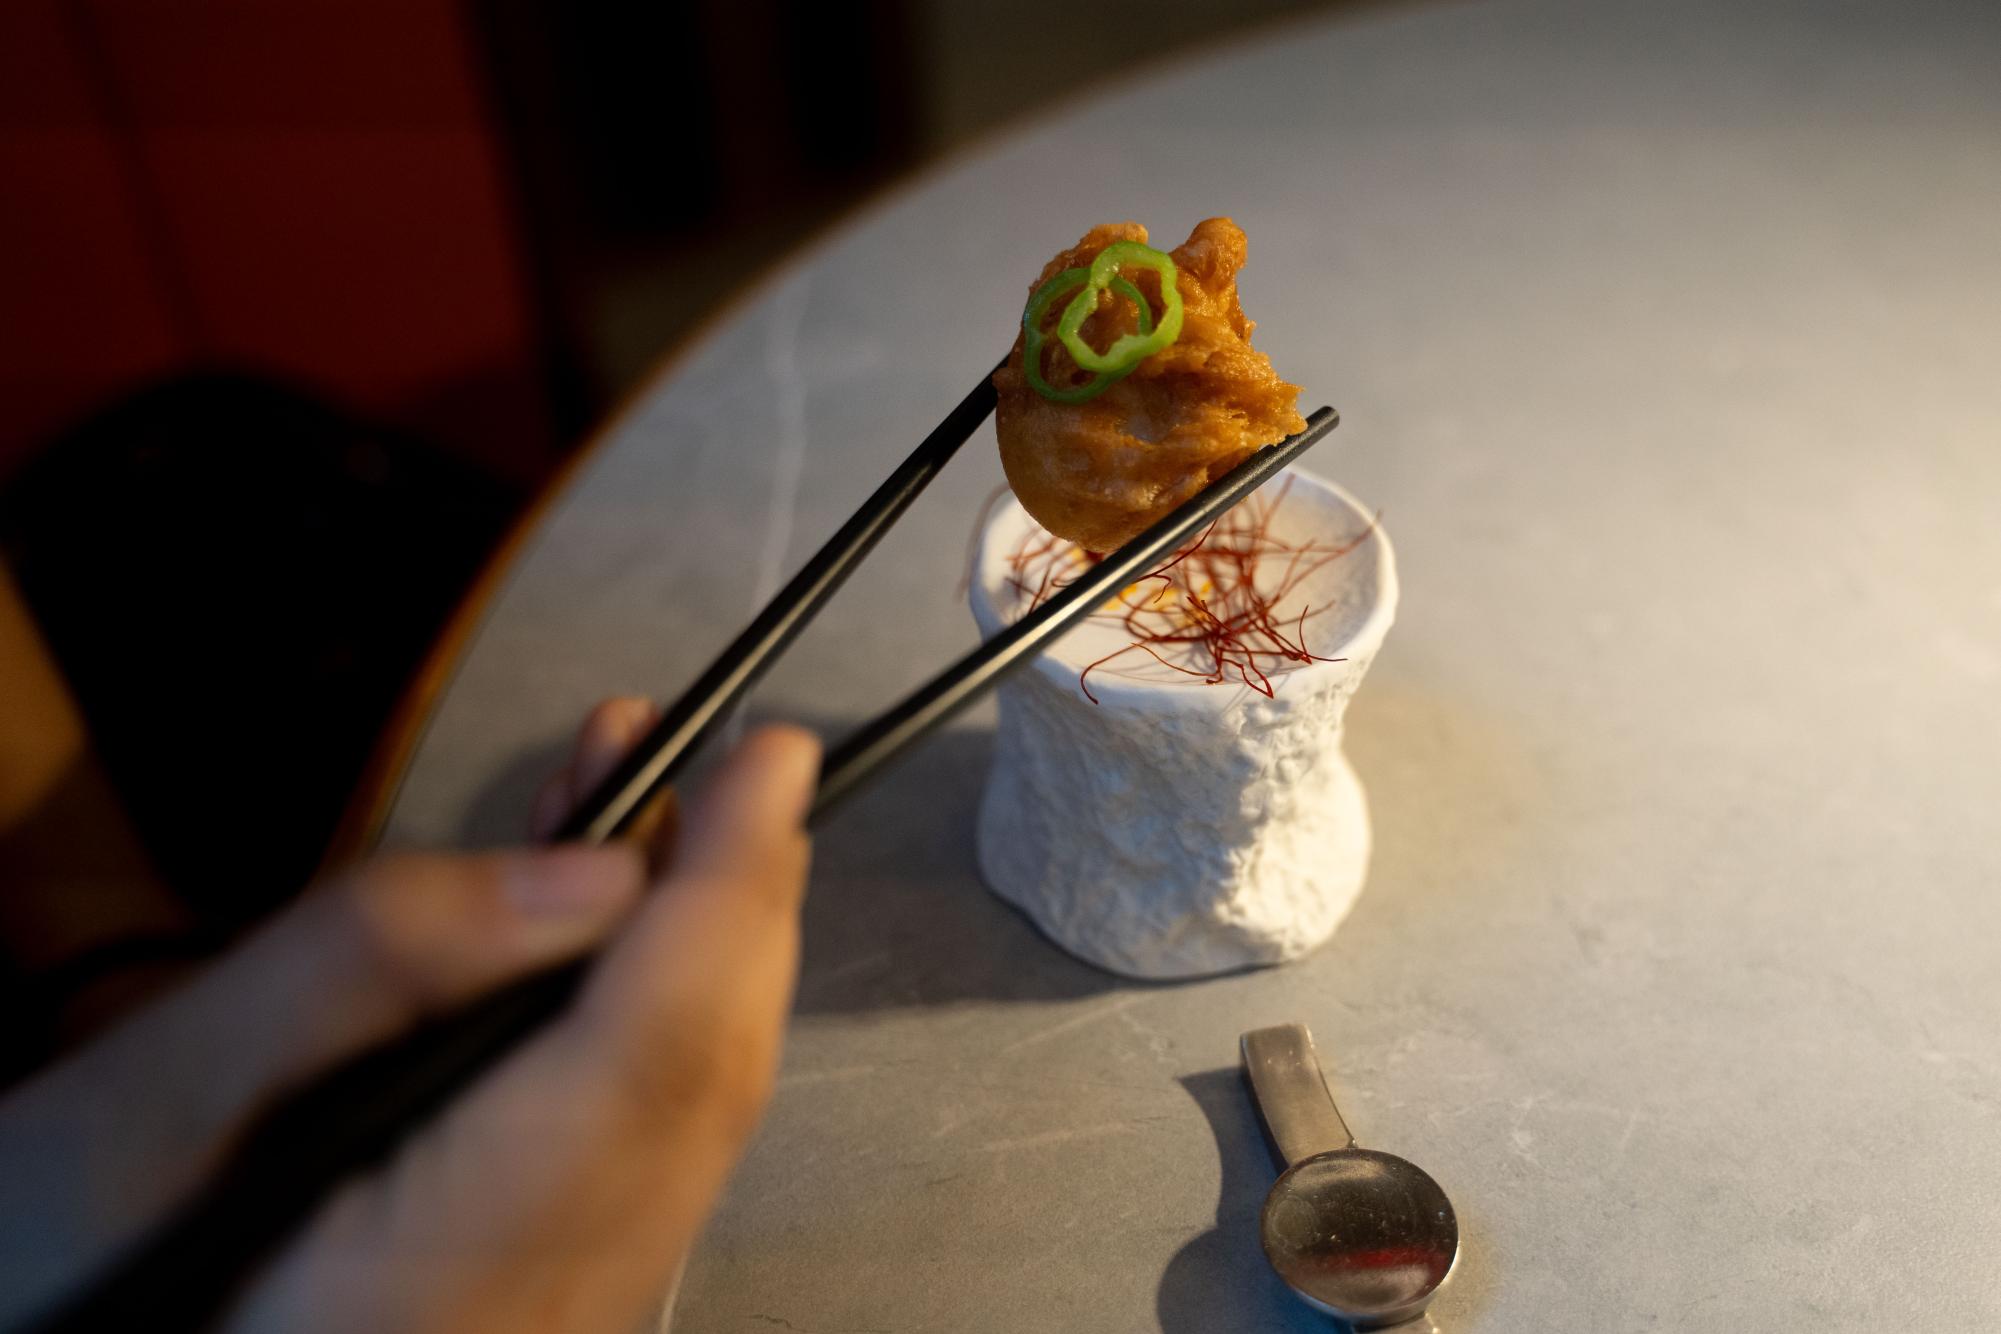 A hand holding chopsticks picks up a small piece of fried scallop garnished with pepper slices on an artisanal stand.